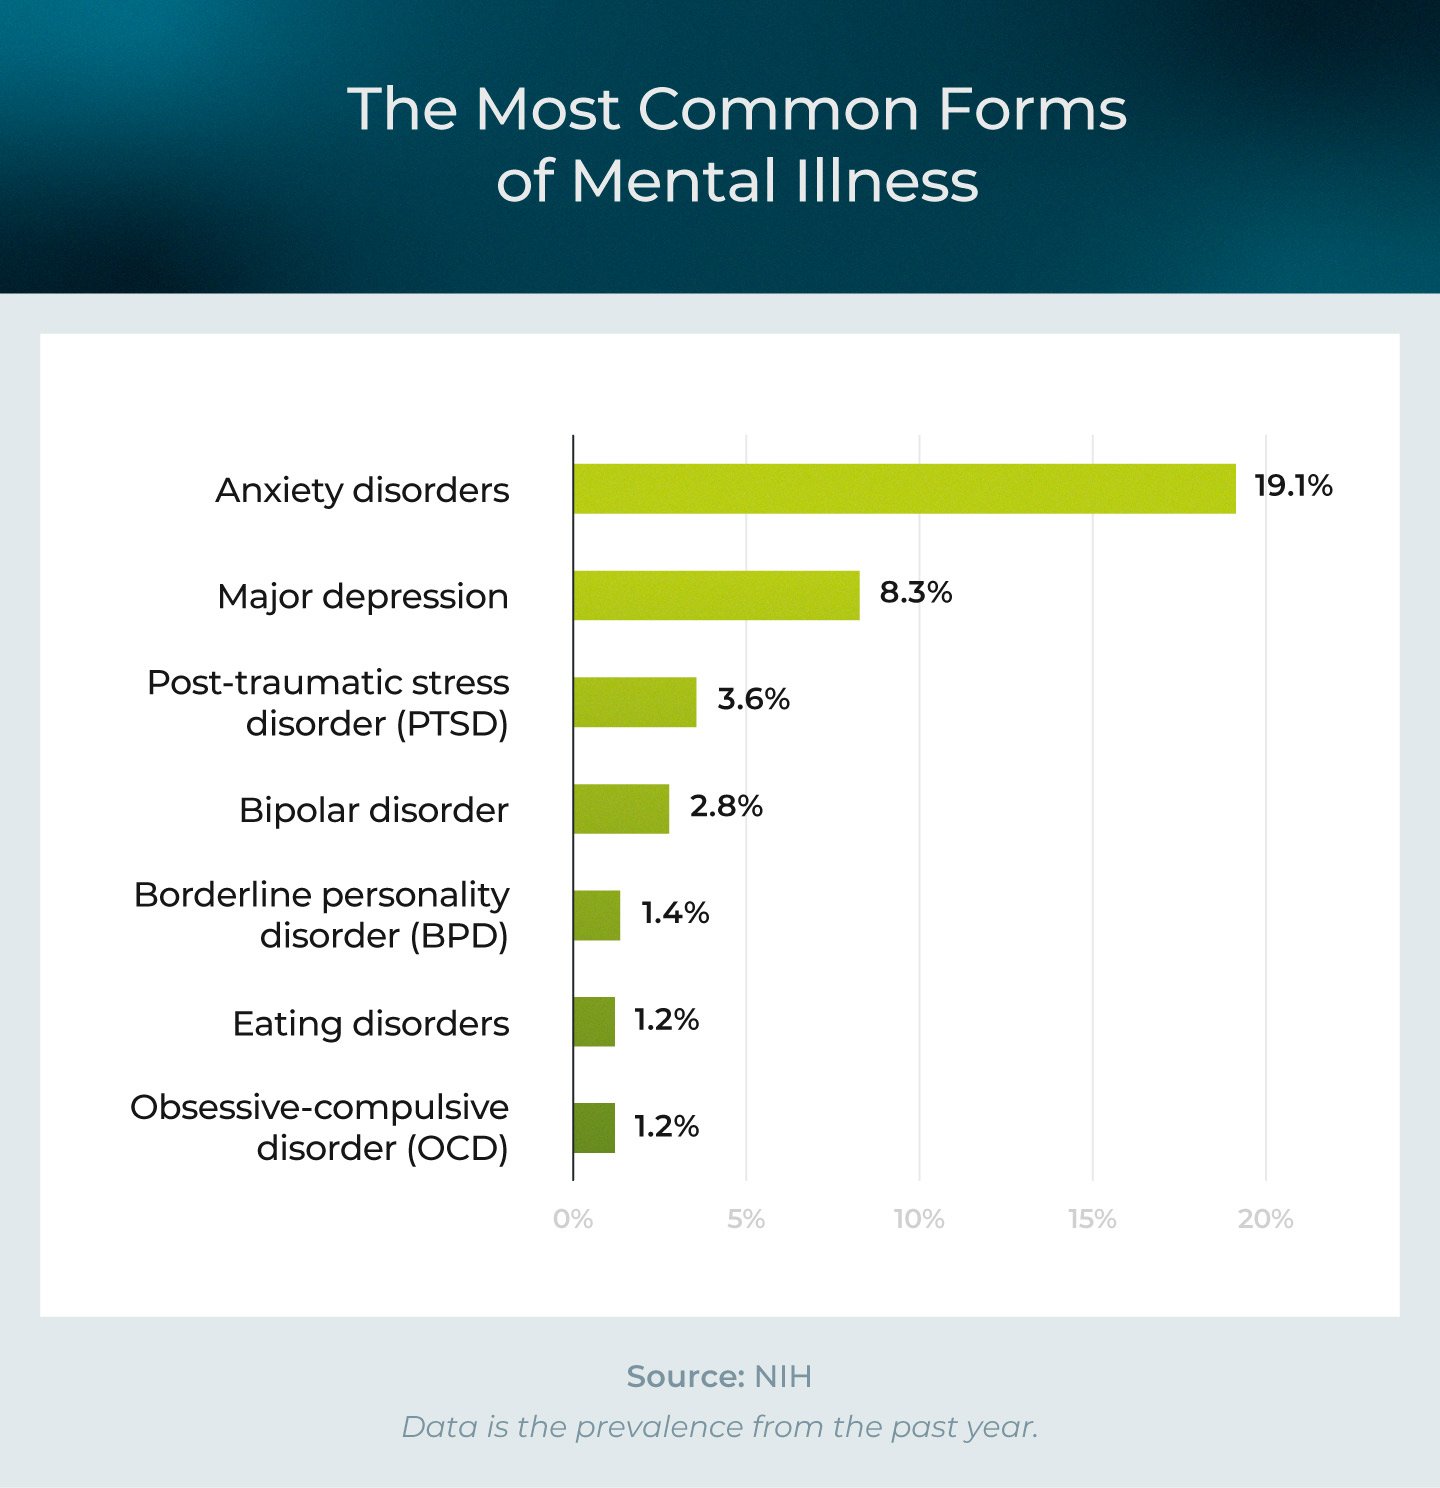 The most common types of mental illness